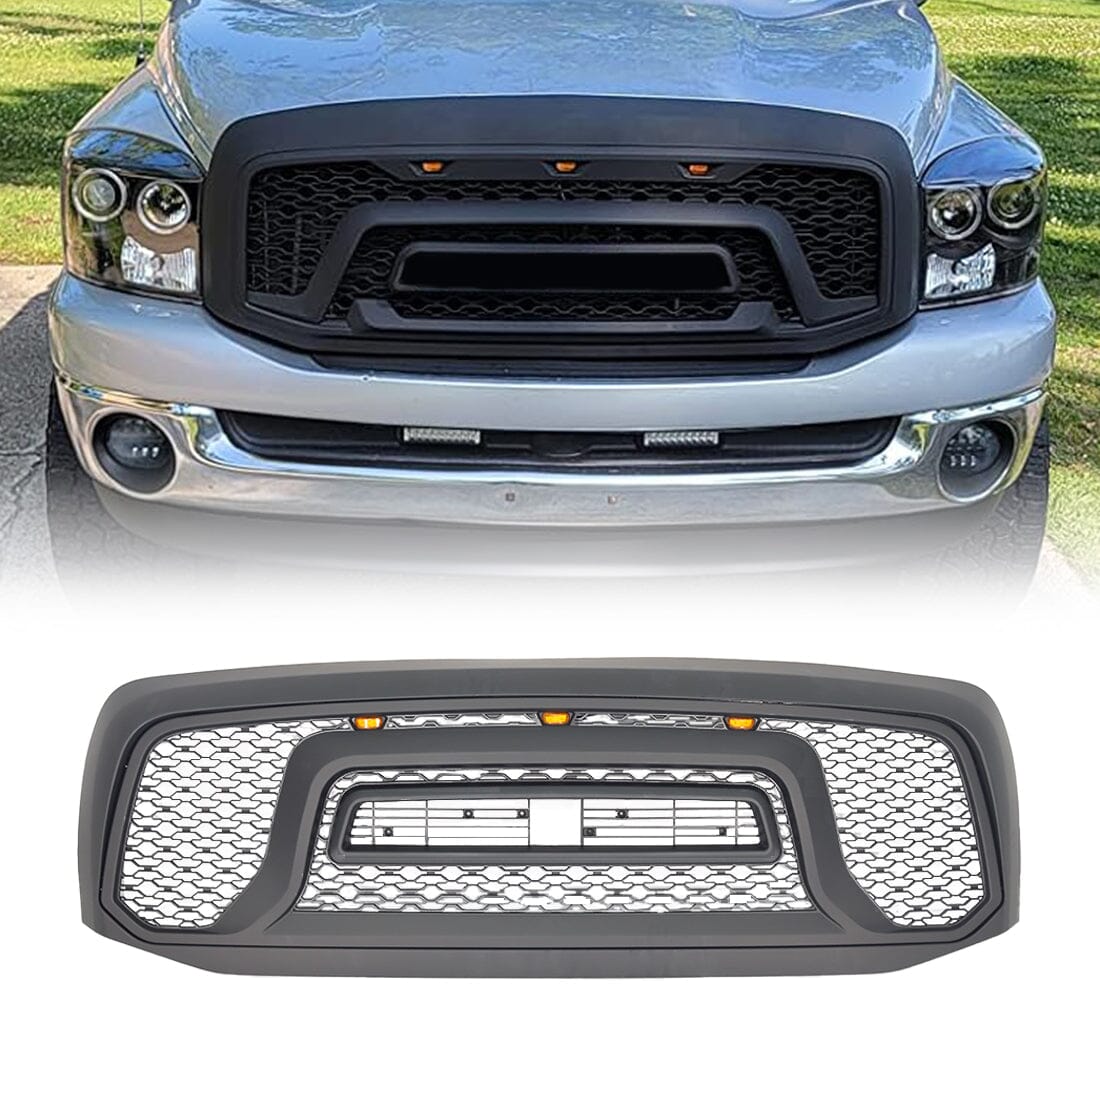 Rebel Style Front Grille W/Amber Led Lights For 2006-2008 Dodge Ram 1500| Amoffroad